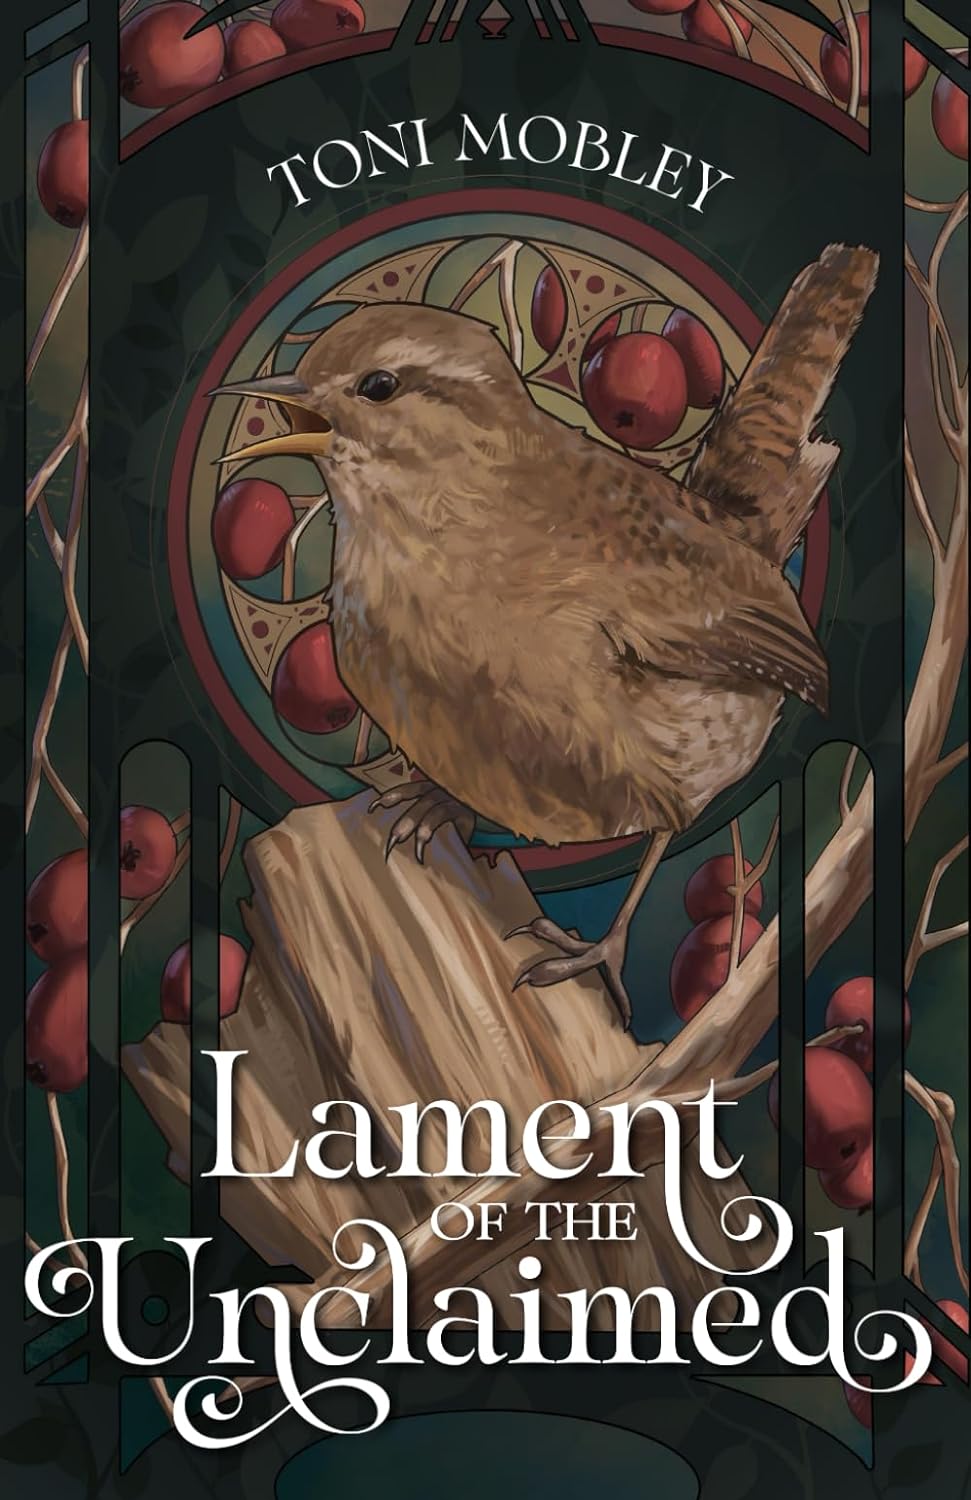 Photo of a wren sitting on a branch surrounded by berries with the title: Lament of the Unclaimed and the author's name: Toni Mobley